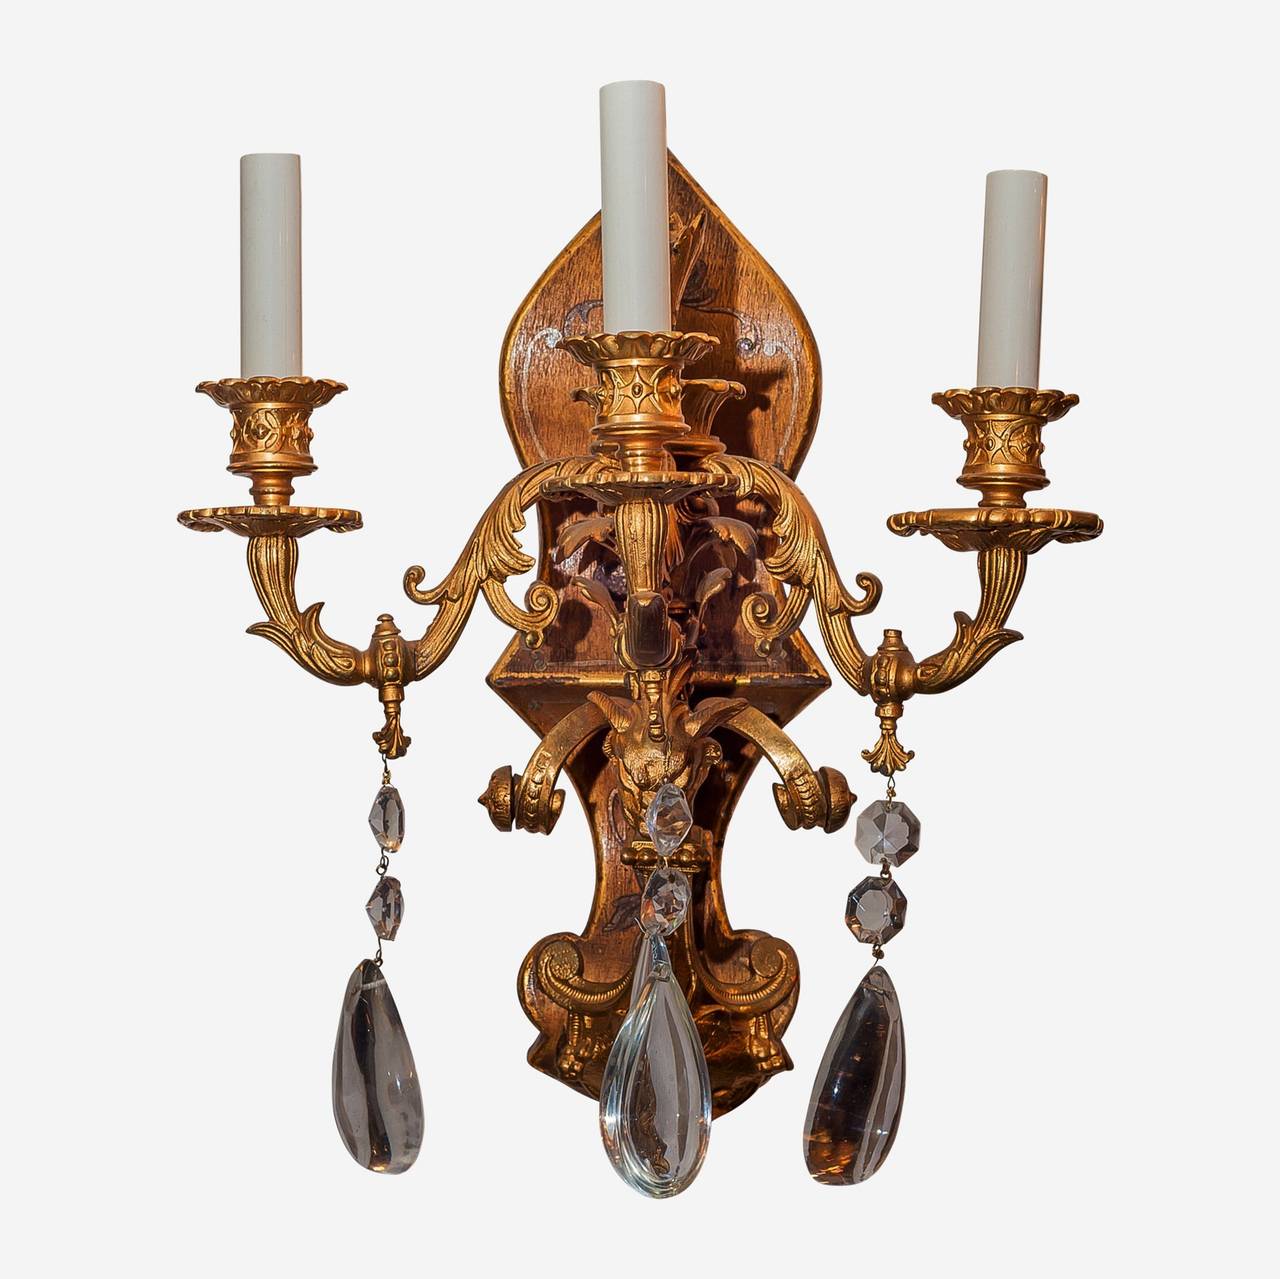 Pair of Gilt Metal Painted Chinoiserie Three-Arm Wall Light Sconces
Stock Number: L234